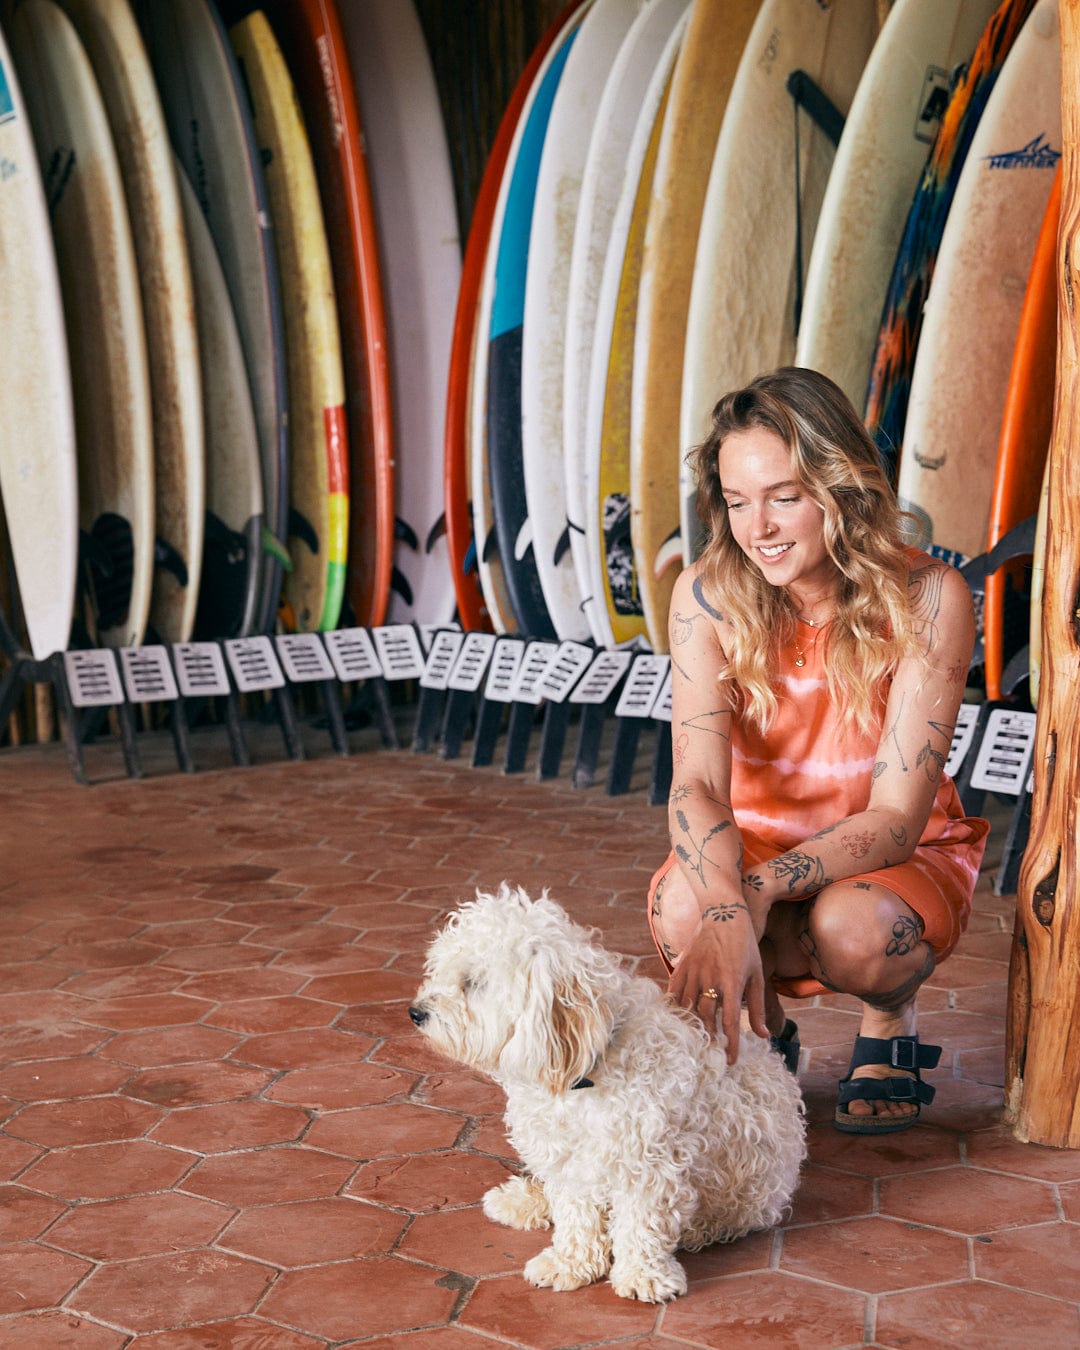 A person in a Saltrock Eliana - Womens Tie Dye Vest Dress - Peach and sandals is petting a fluffy white dog in front of a display of surfboards.